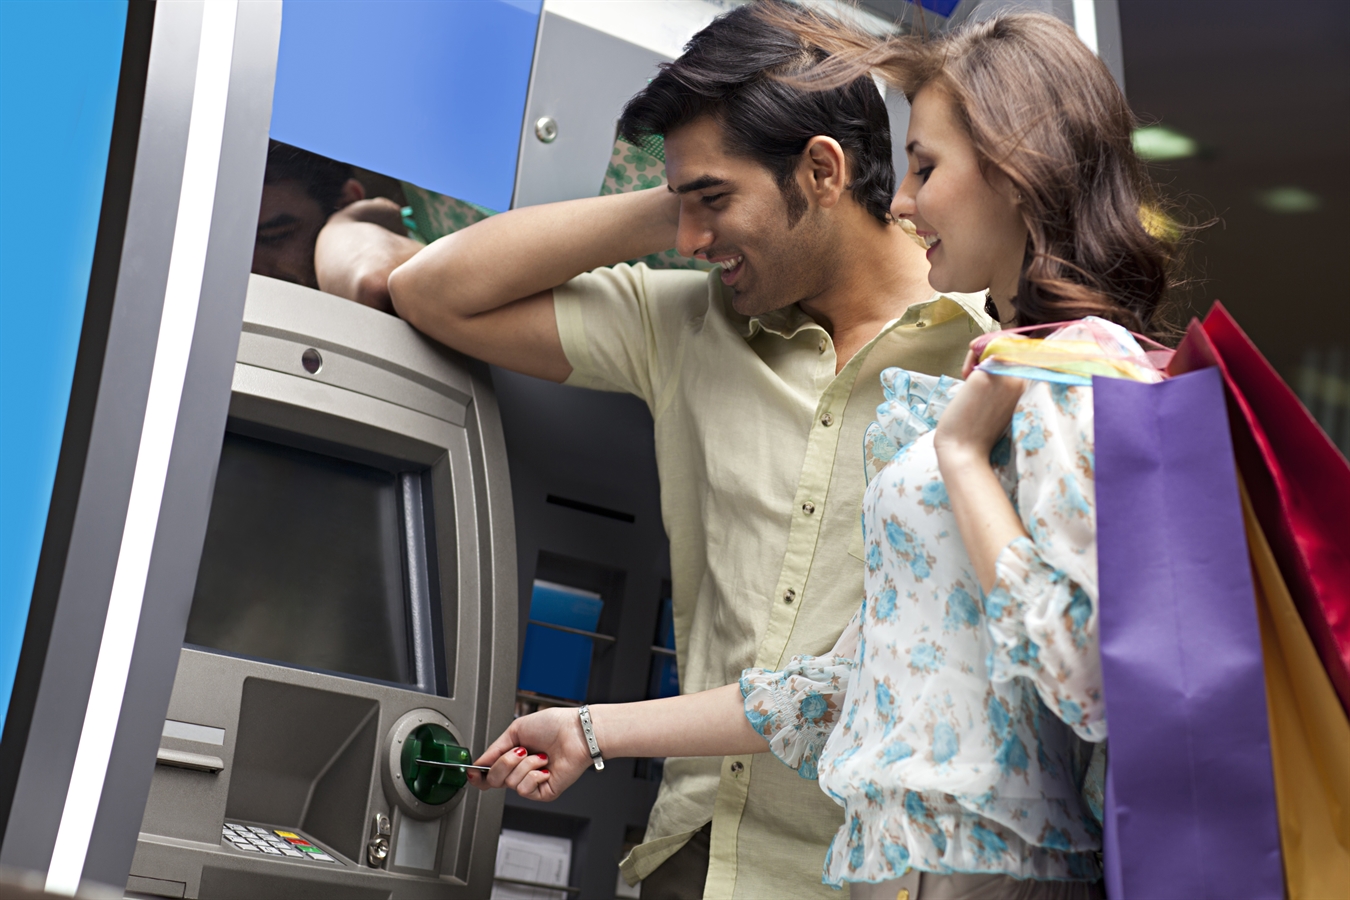 Set your own Green PIN for CUB ATM card through simple steps